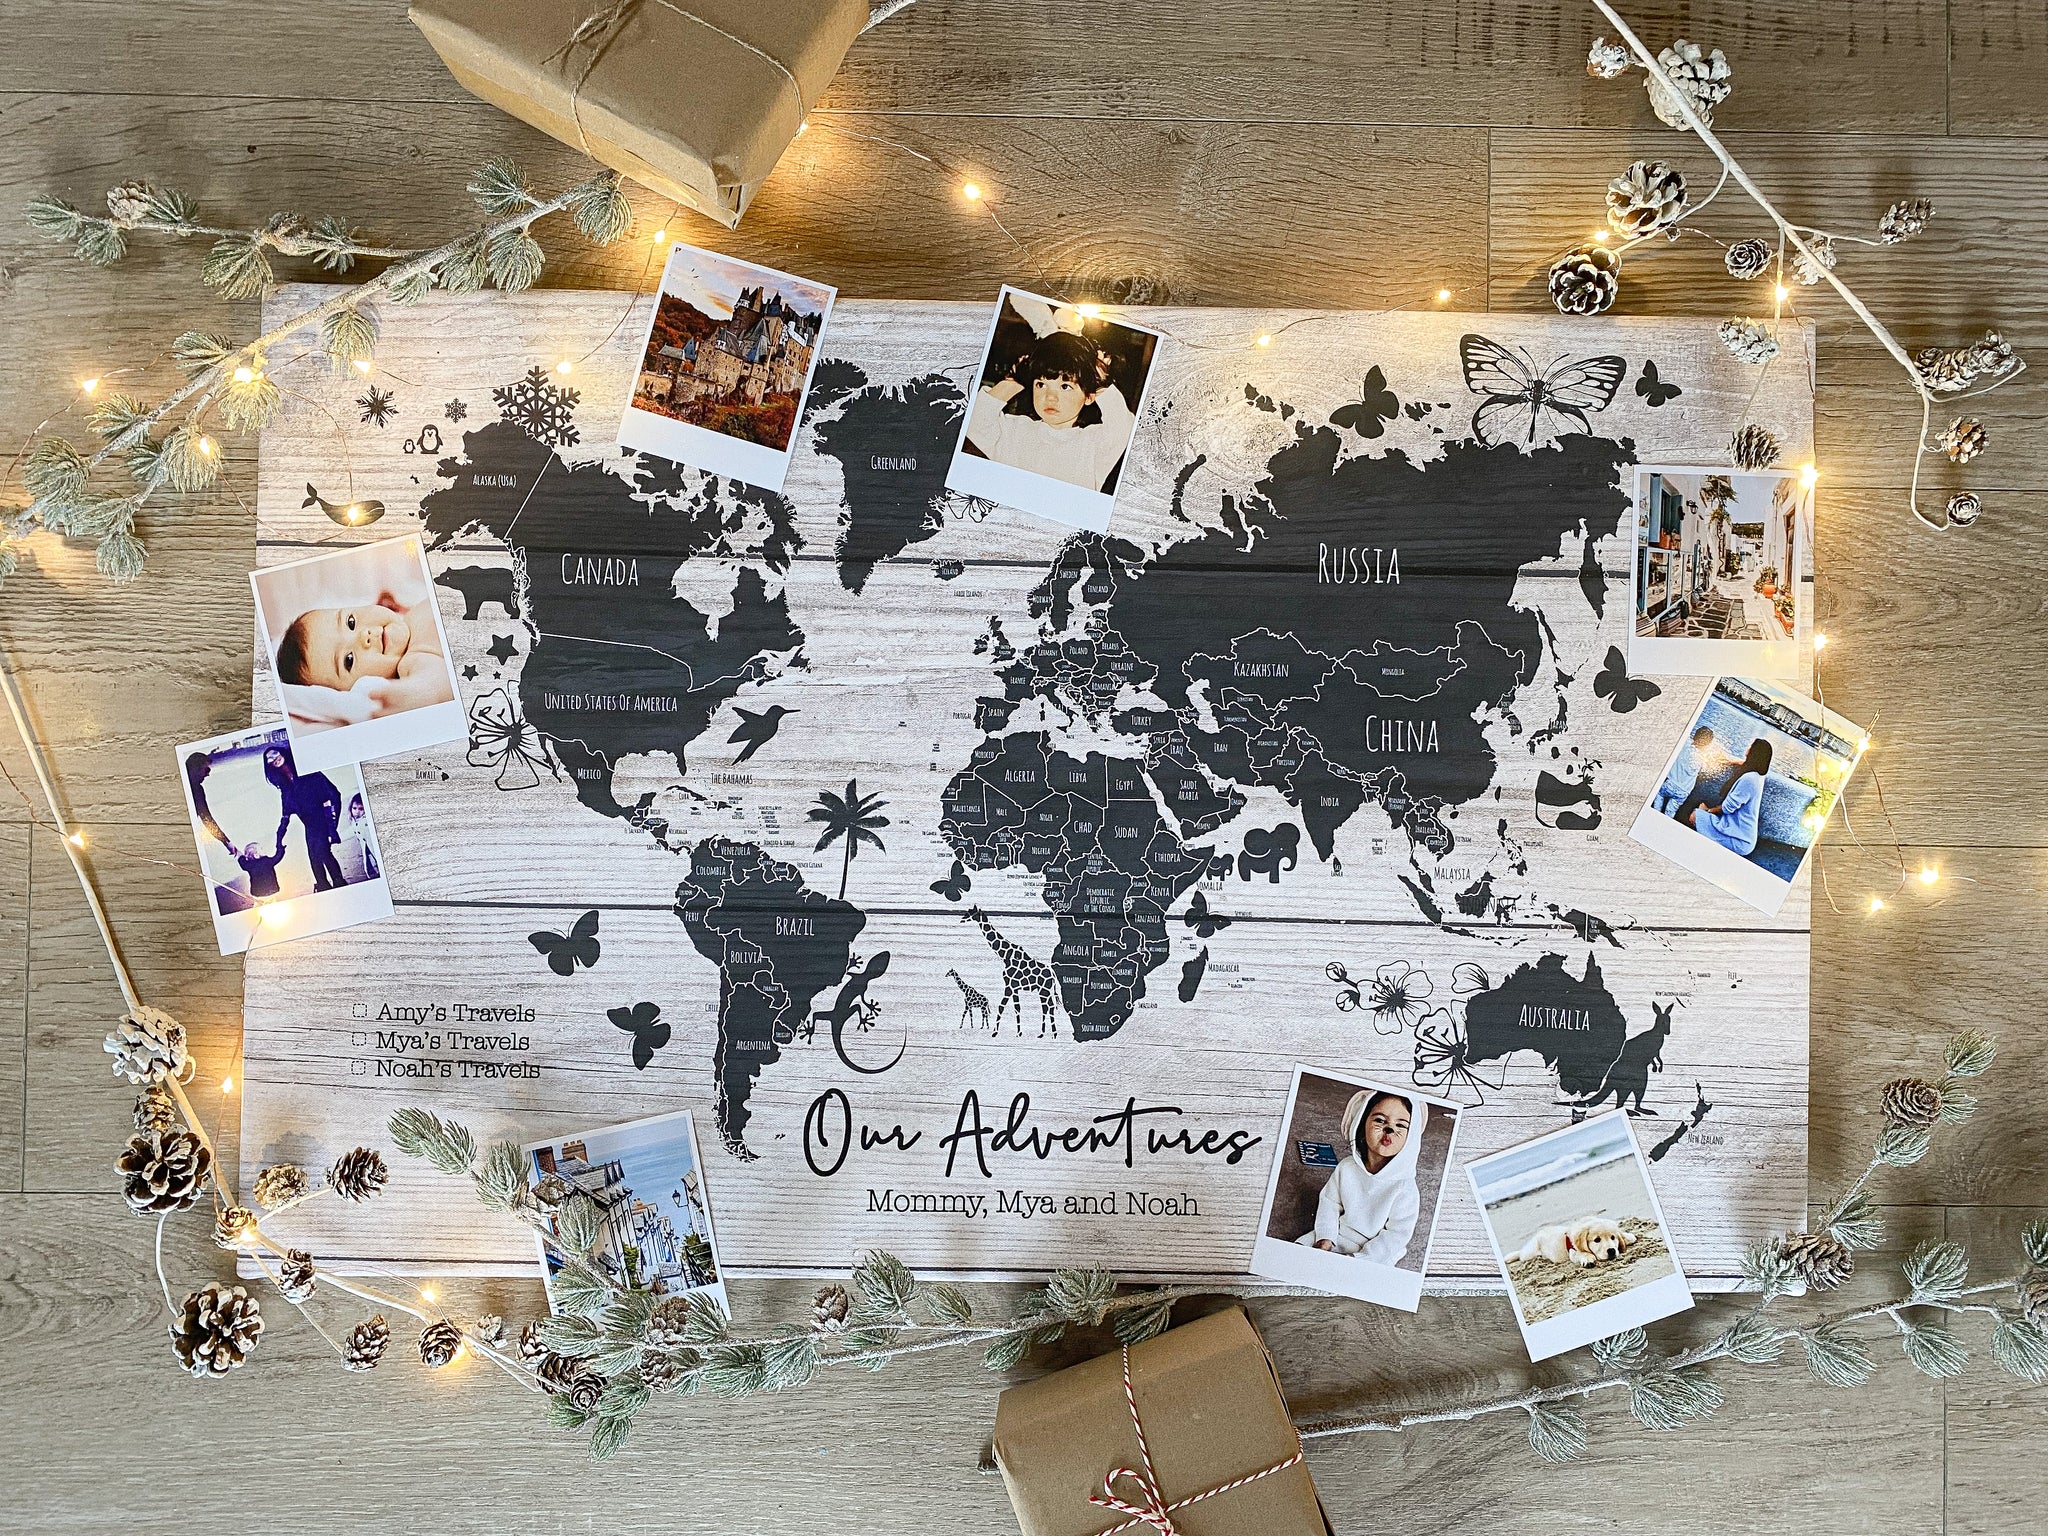 Cork board world map - includes 100 map pins - wood gift idea